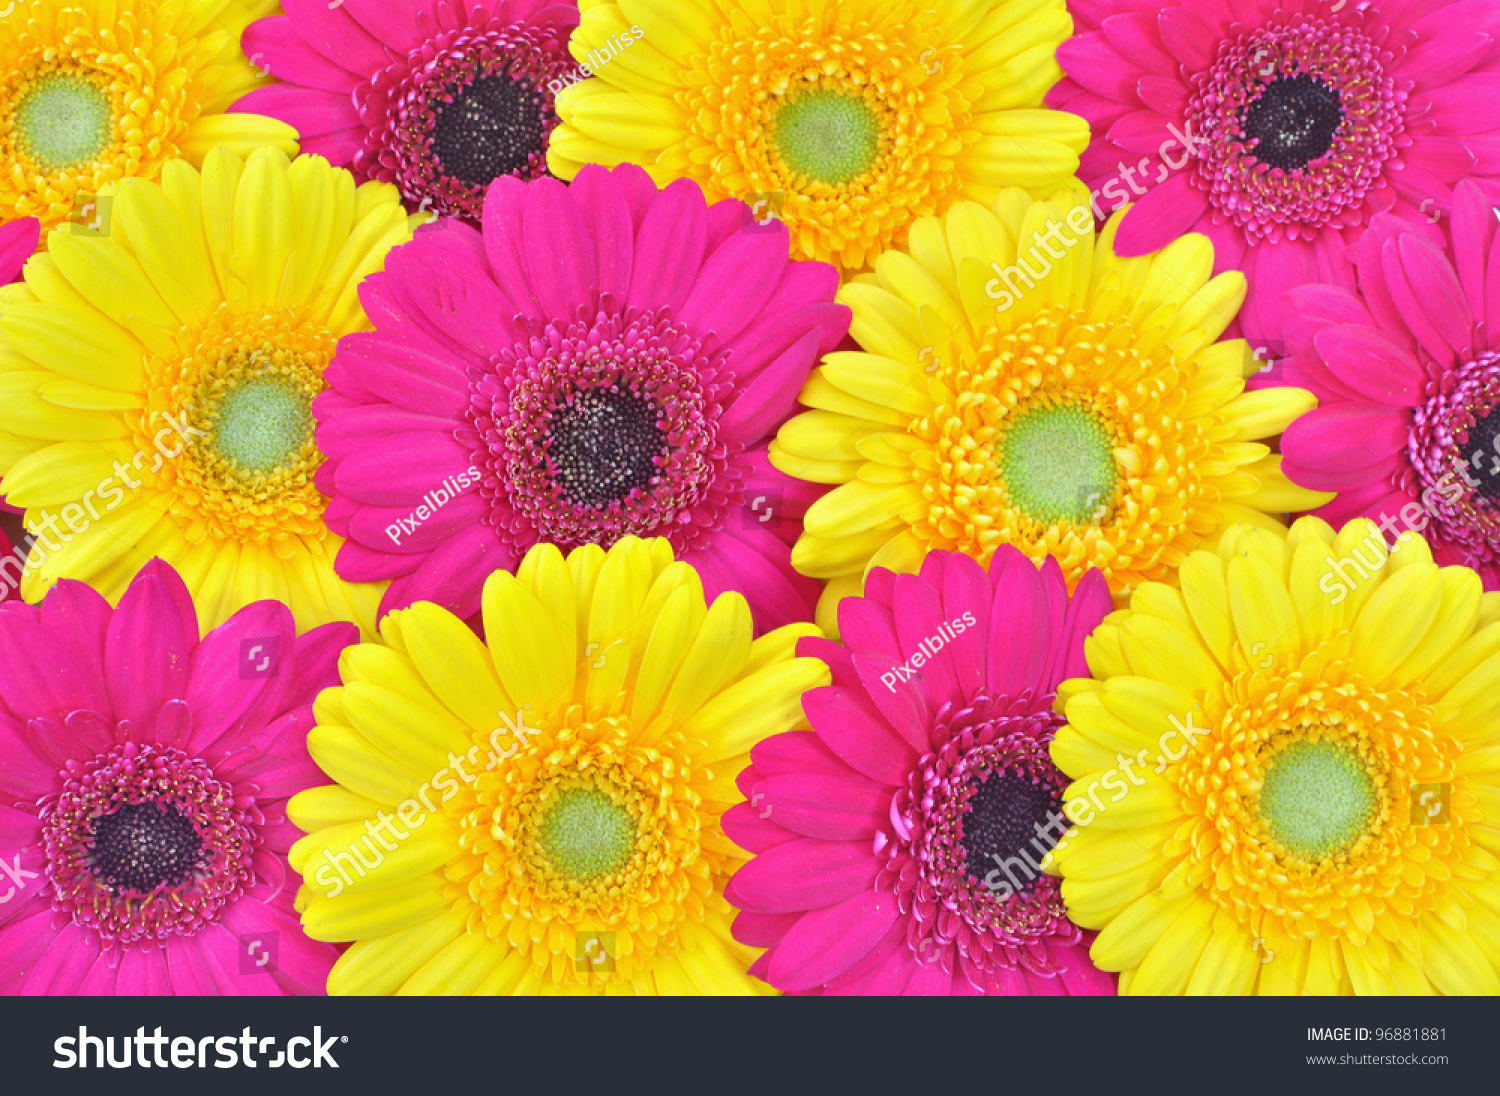 Pink Yellow Flowers Background Stock Photo 96881881 ...
